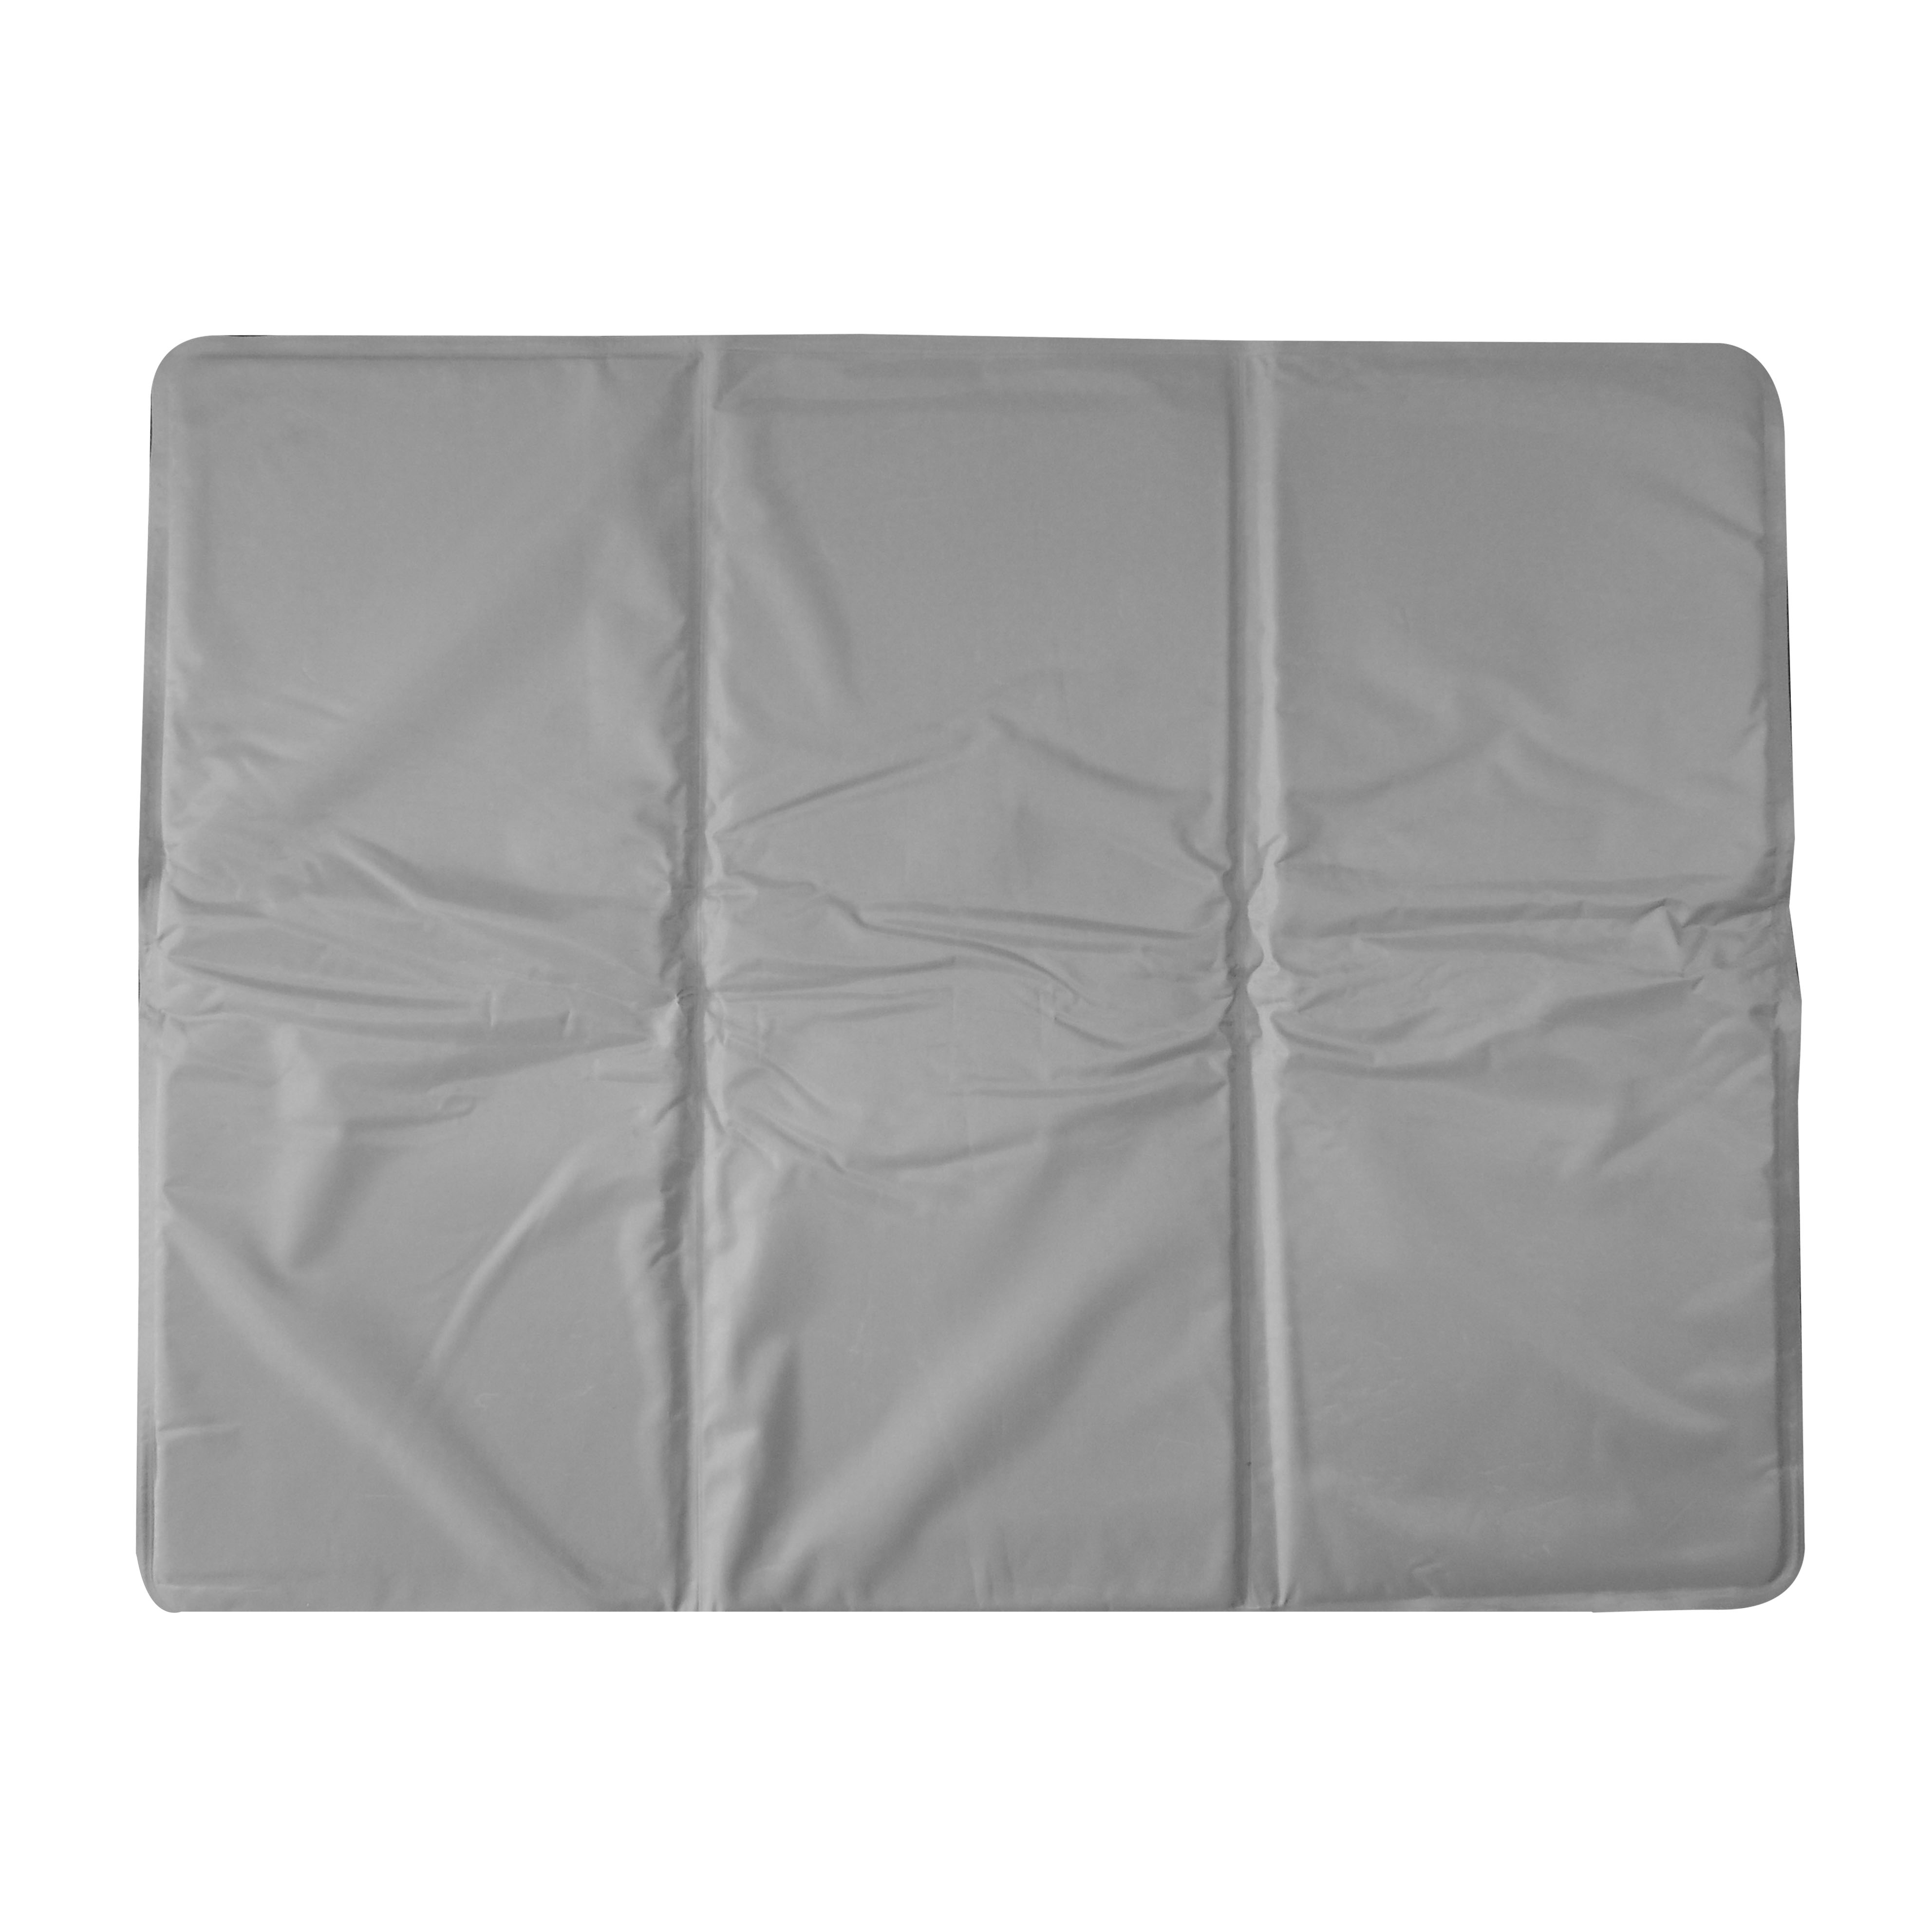 Cooling mat for animals 